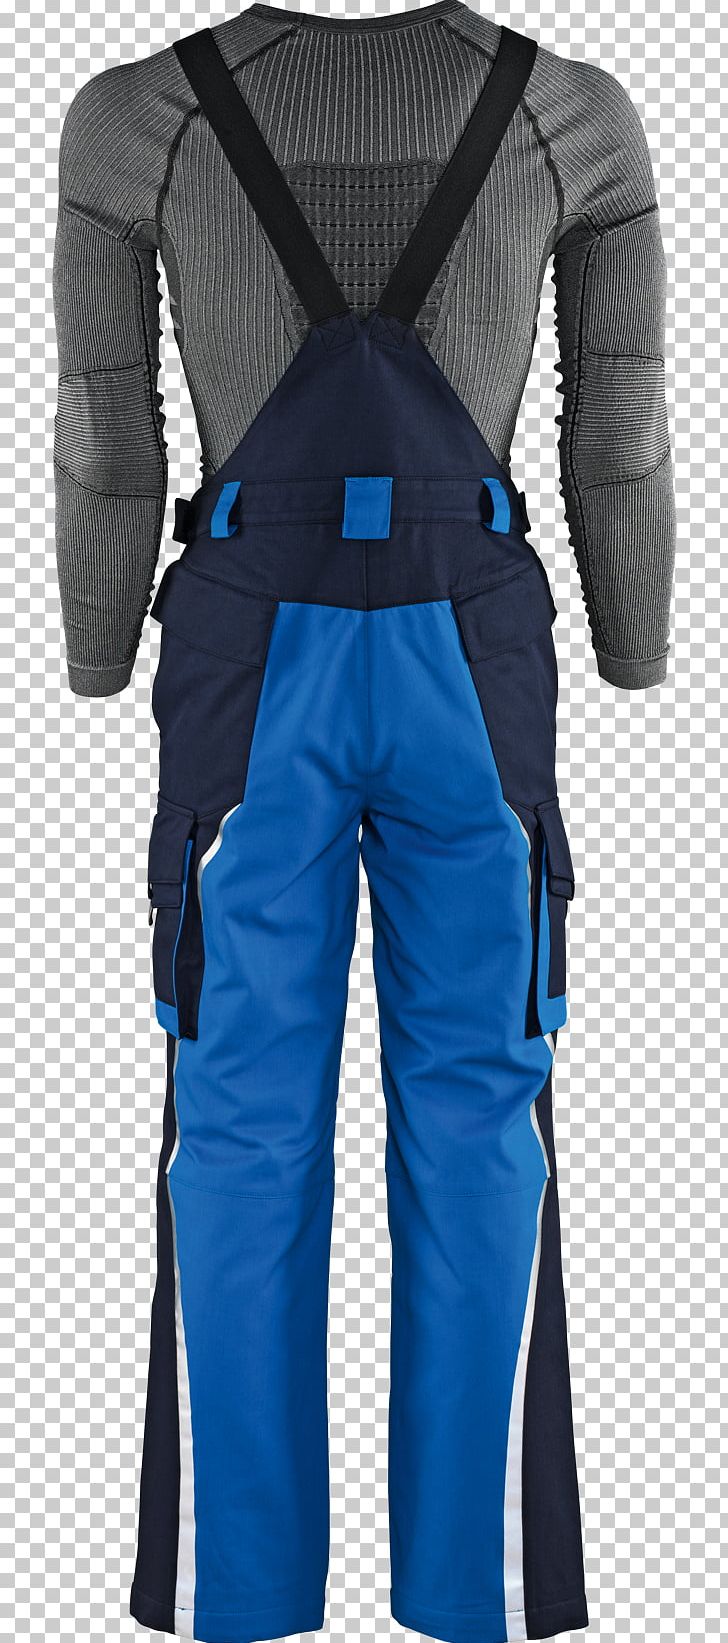 Dry Suit Hockey Protective Pants & Ski Shorts Overall PNG, Clipart, Dry Suit, Electric Blue, Flash Material, Hockey, Hockey Protective Pants Ski Shorts Free PNG Download